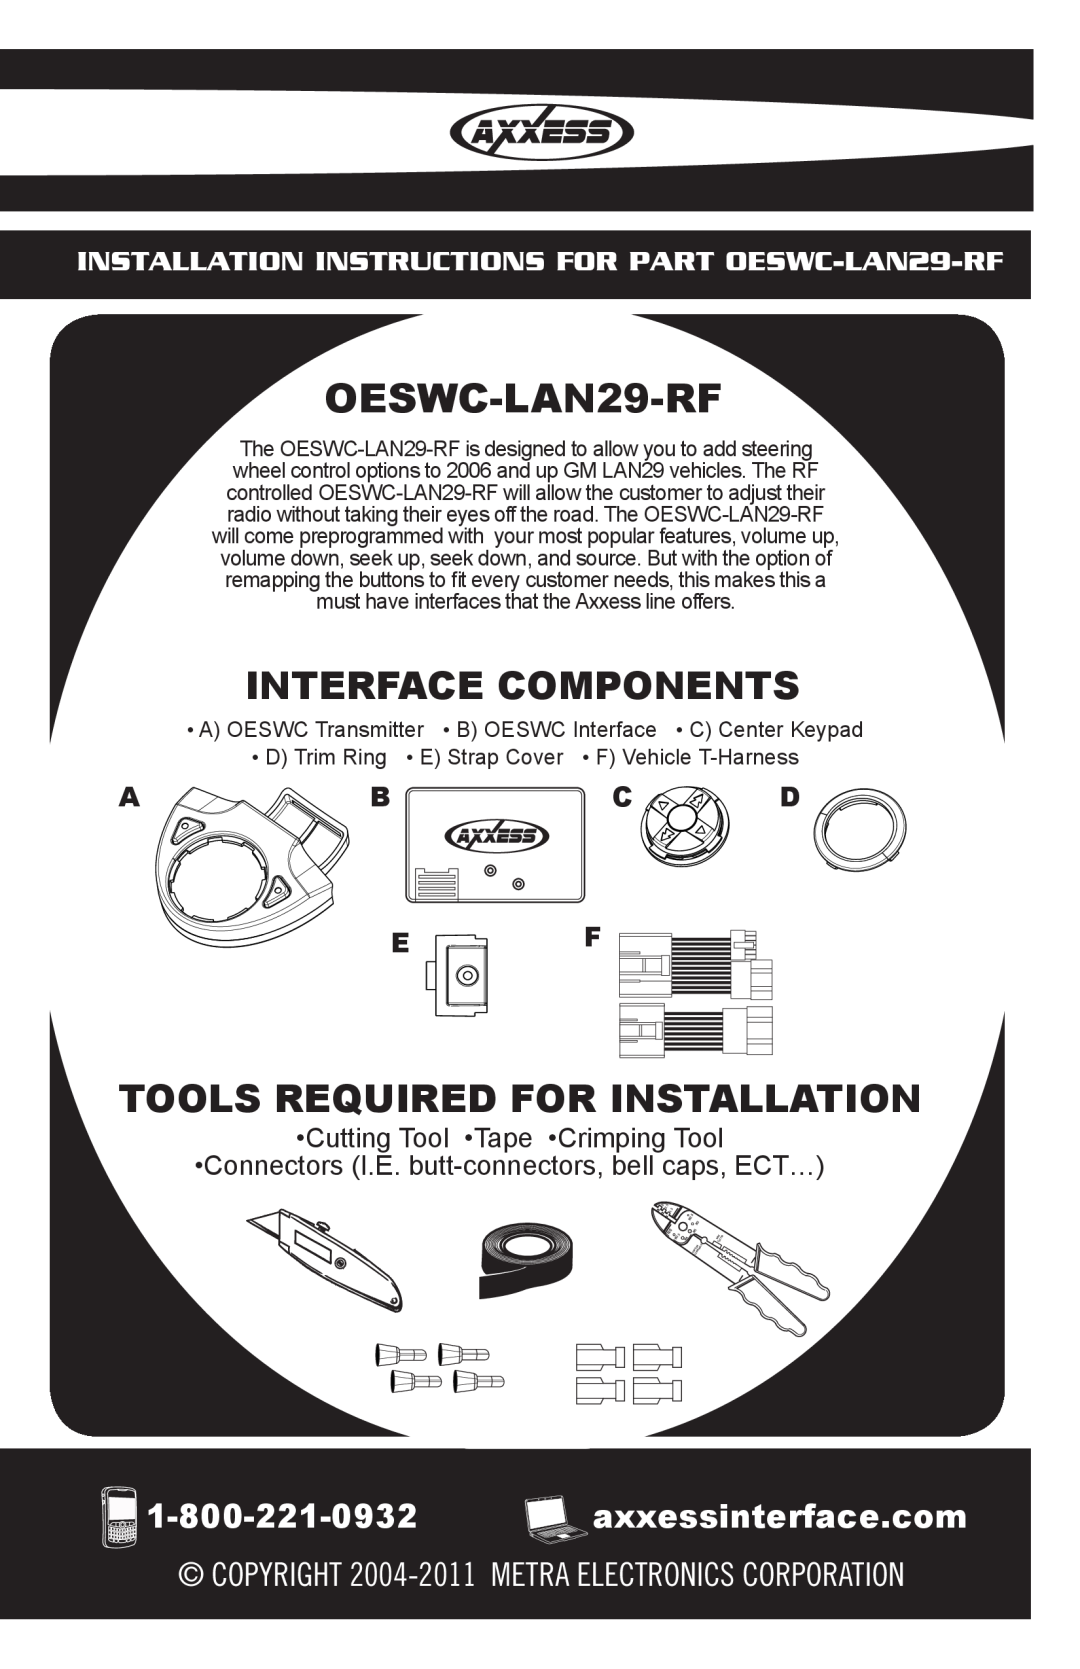 Axxess Interface OESWC-LAN29-RF installation instructions Interface Components, Tools Required For Installation, A B E 